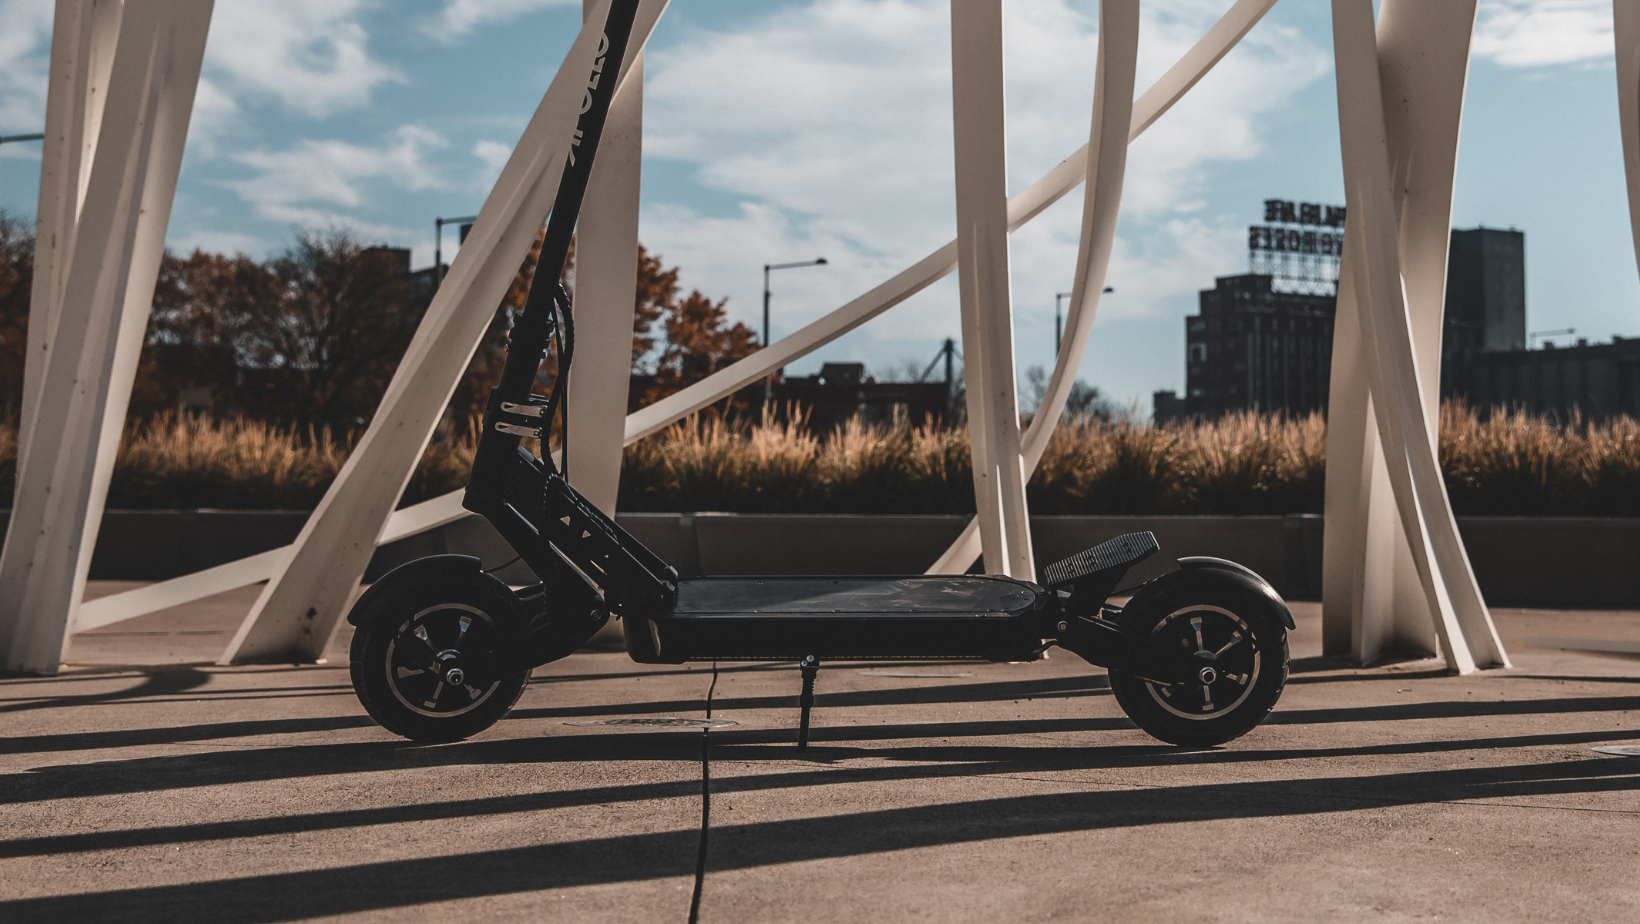 7 Reasons Why Electric Scooters are Better Than Cars